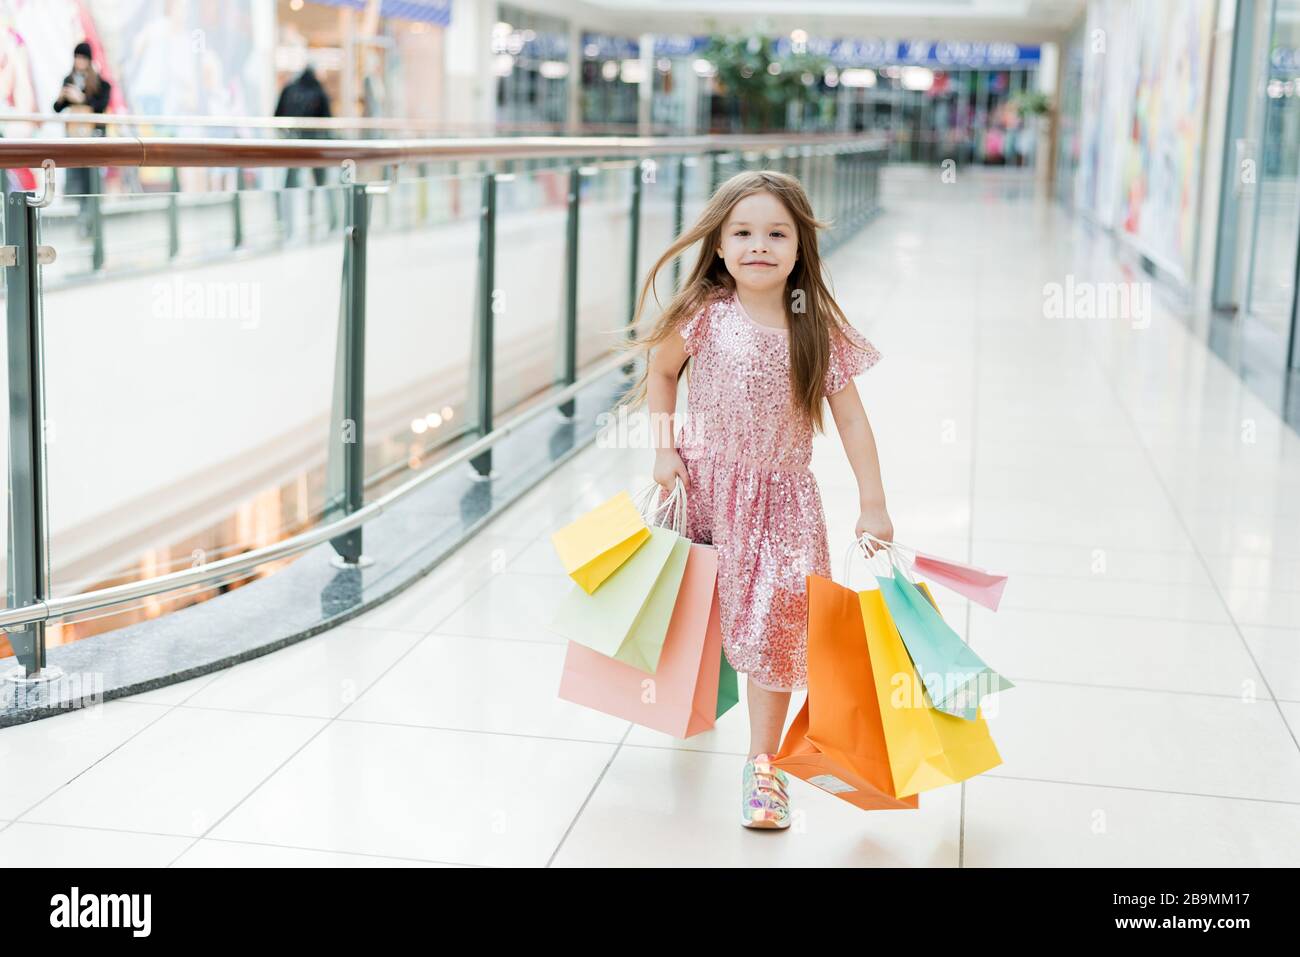 Cheerful preschool girl walking with shopping bags. Pretty smiling little girl with shopping bags posing in the shop. The concept of shopping in stores. Stock Photo